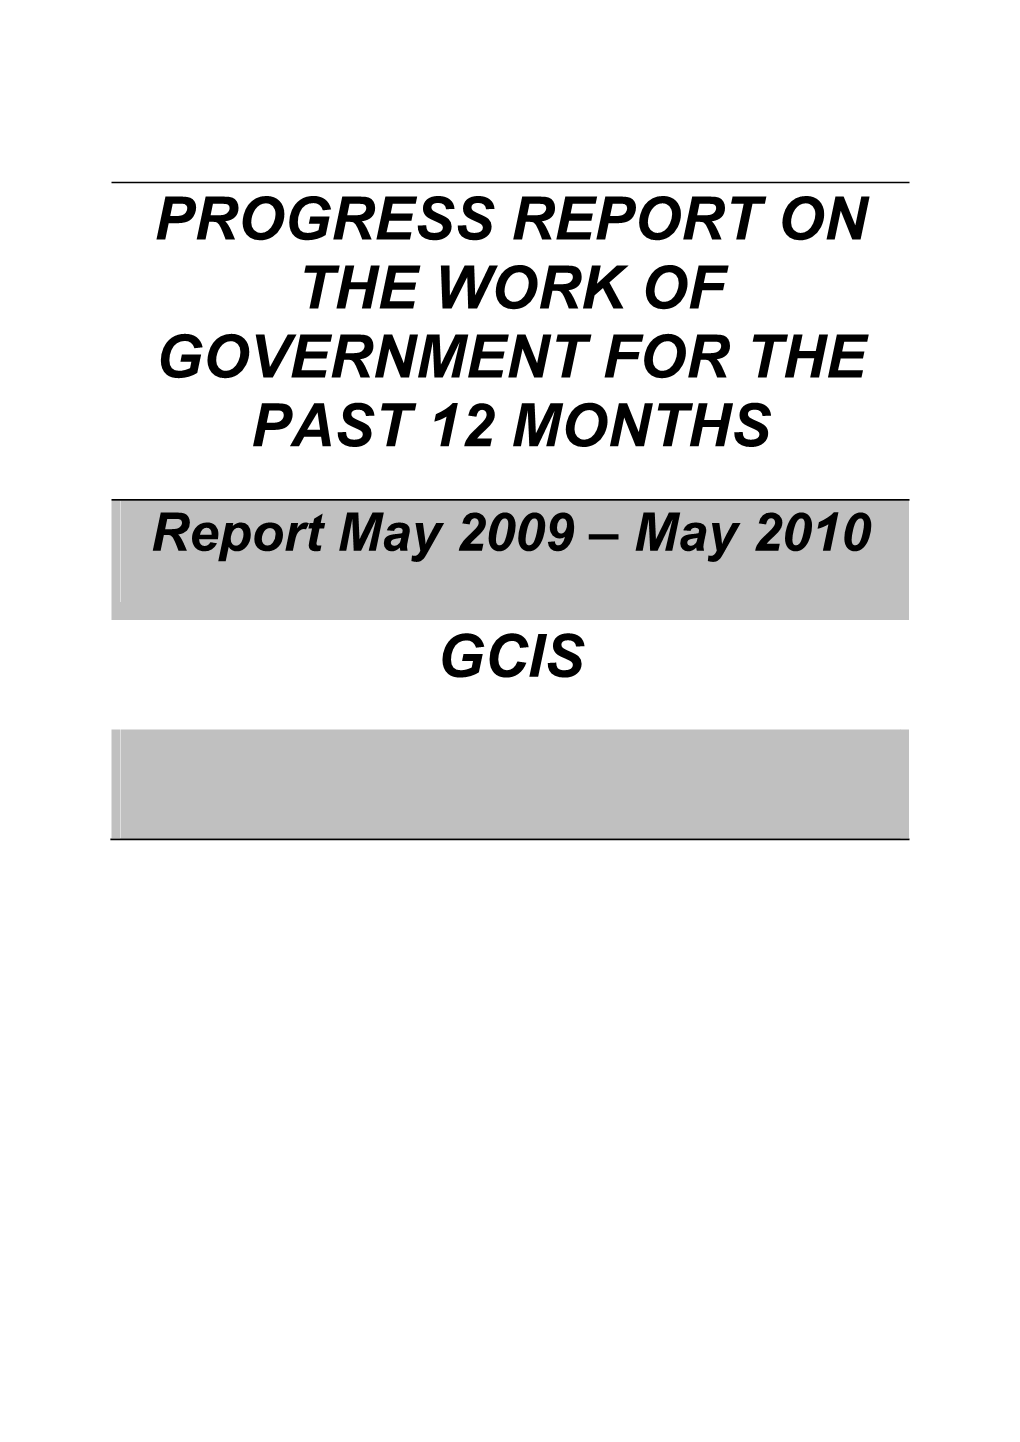 PROGRESS REPORT on the WORK of GOVERNMENT for the PAST 12 MONTHS Report May 2009 – May 2010